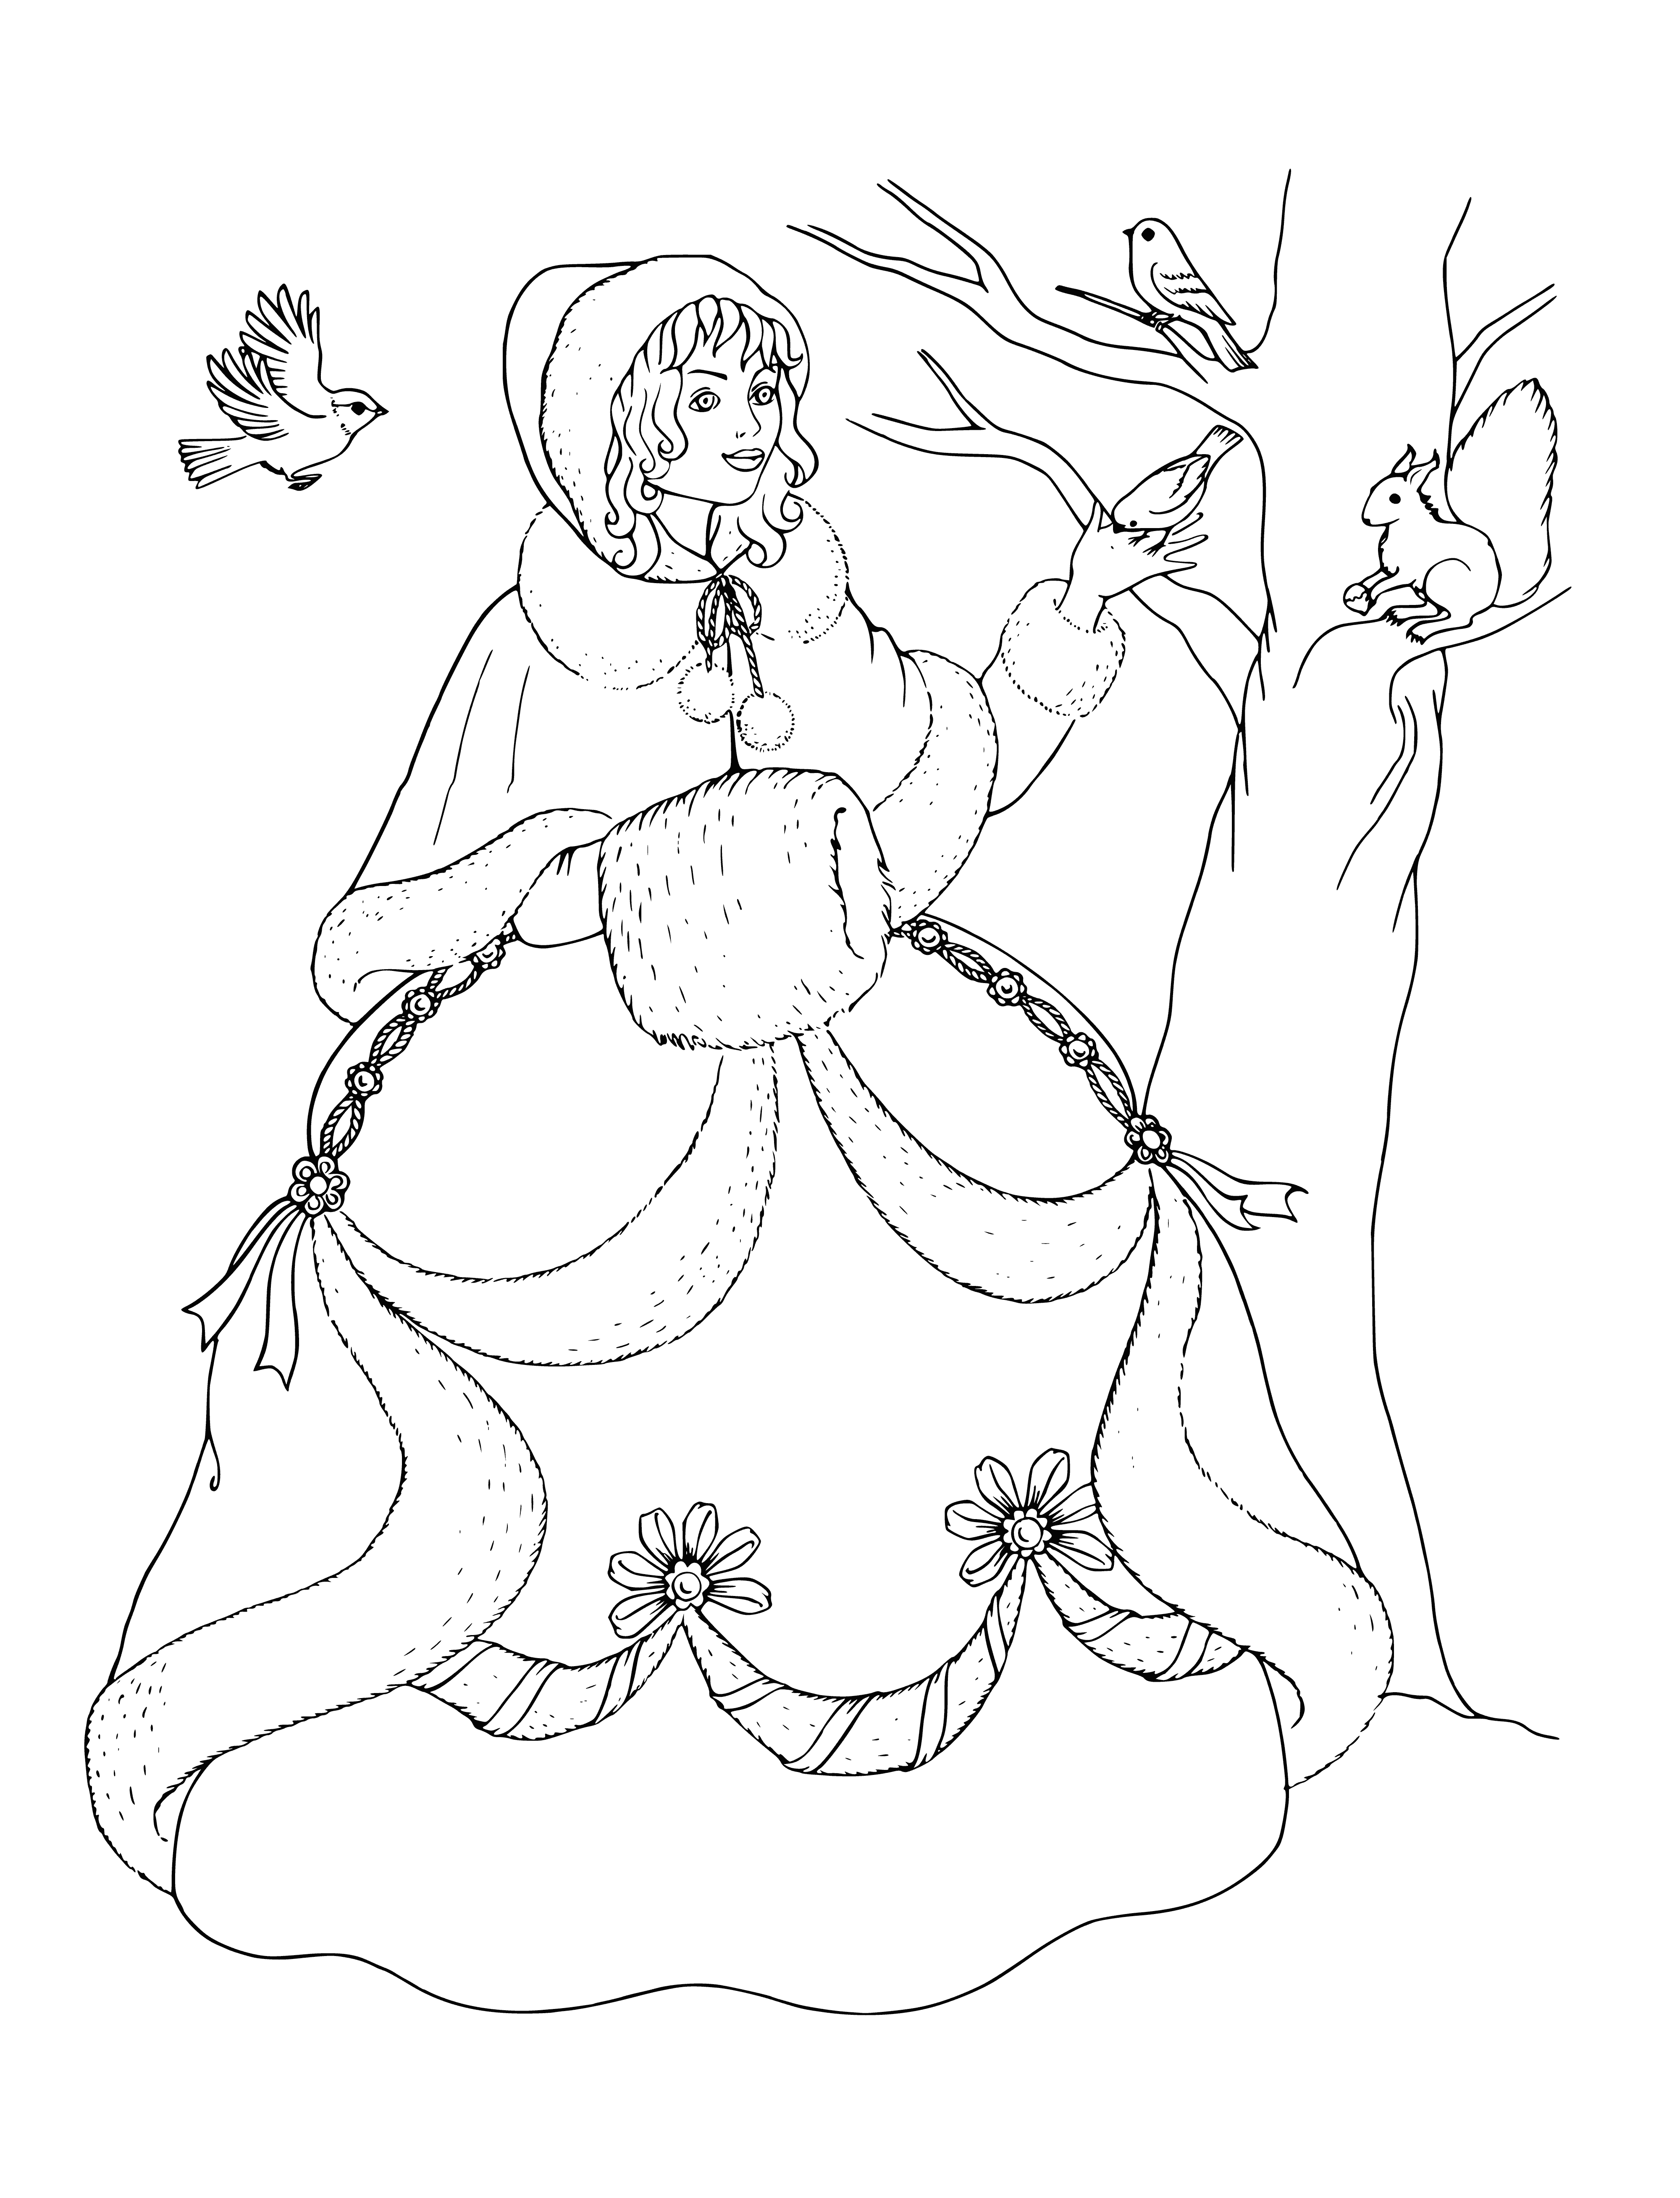 coloring page: Princess stands on hill in snow, wearing white dress & blue cape, crowned.